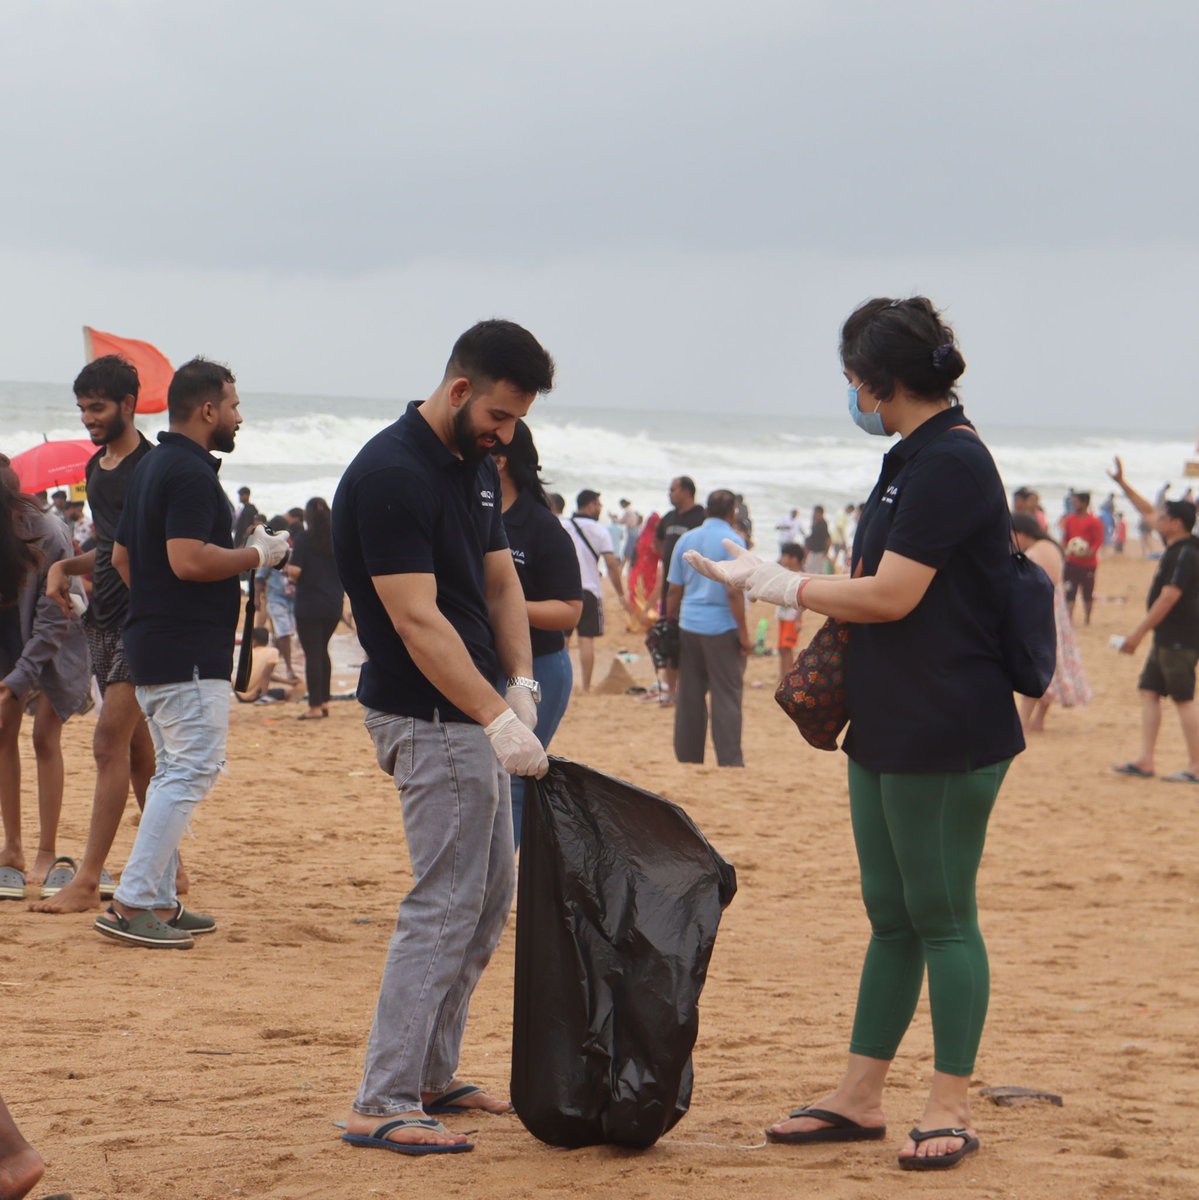 From coastlines to cleanlines. Join the movement! 🌊 #BeachCleanUp' 
.
.
Follow us at @ihelp_clean_goa for more updates.
.
#swachhbharat #ihelpcleangoa #cleanlinessdrive #ihelpfoundationgoa #goa #india